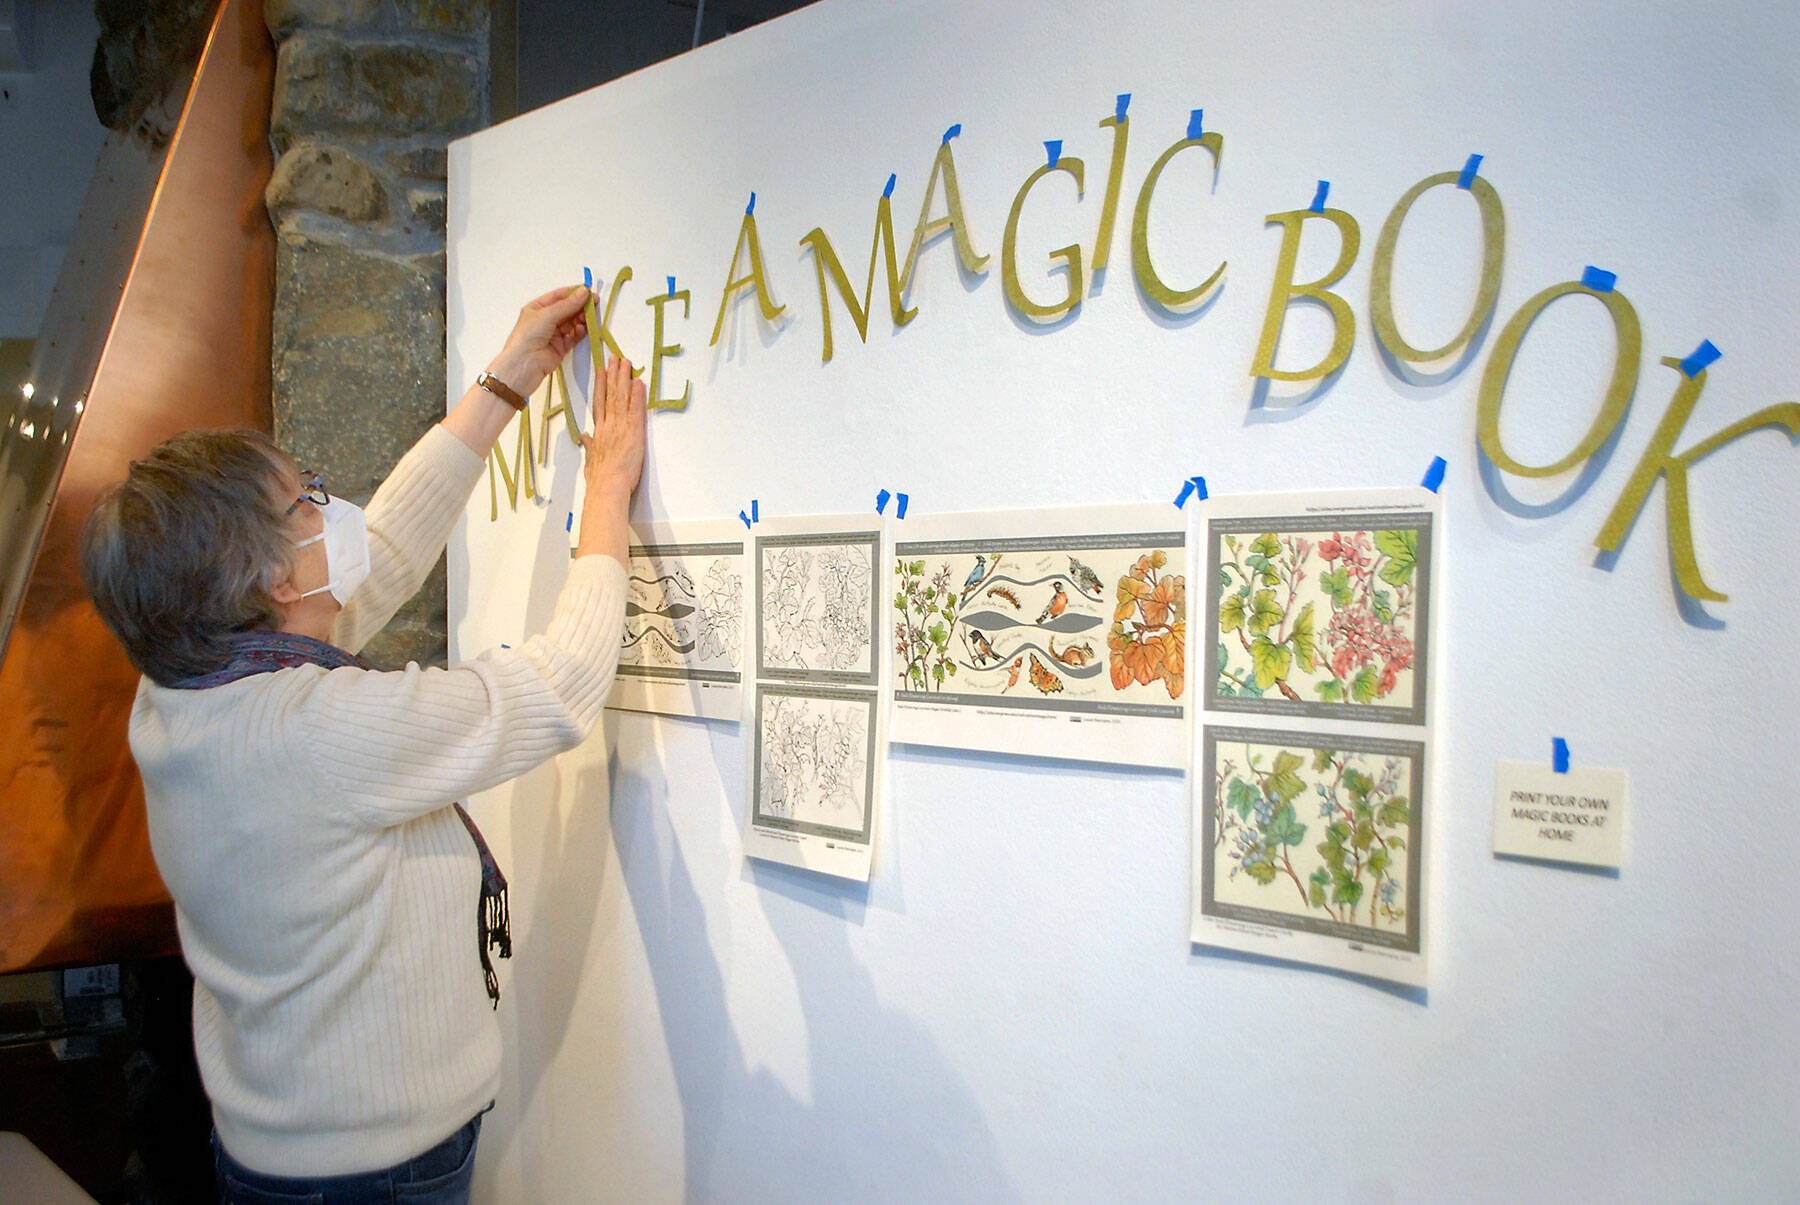 An Gates of Tacoma sets up a book-making exhibit that will be part of “Science Stories: A Collaboration of Book Artists and Scientists,” which opens on Friday at the Port Angeles Fine Arts Center. (Keith Thorpe/Peninsula Daily News)